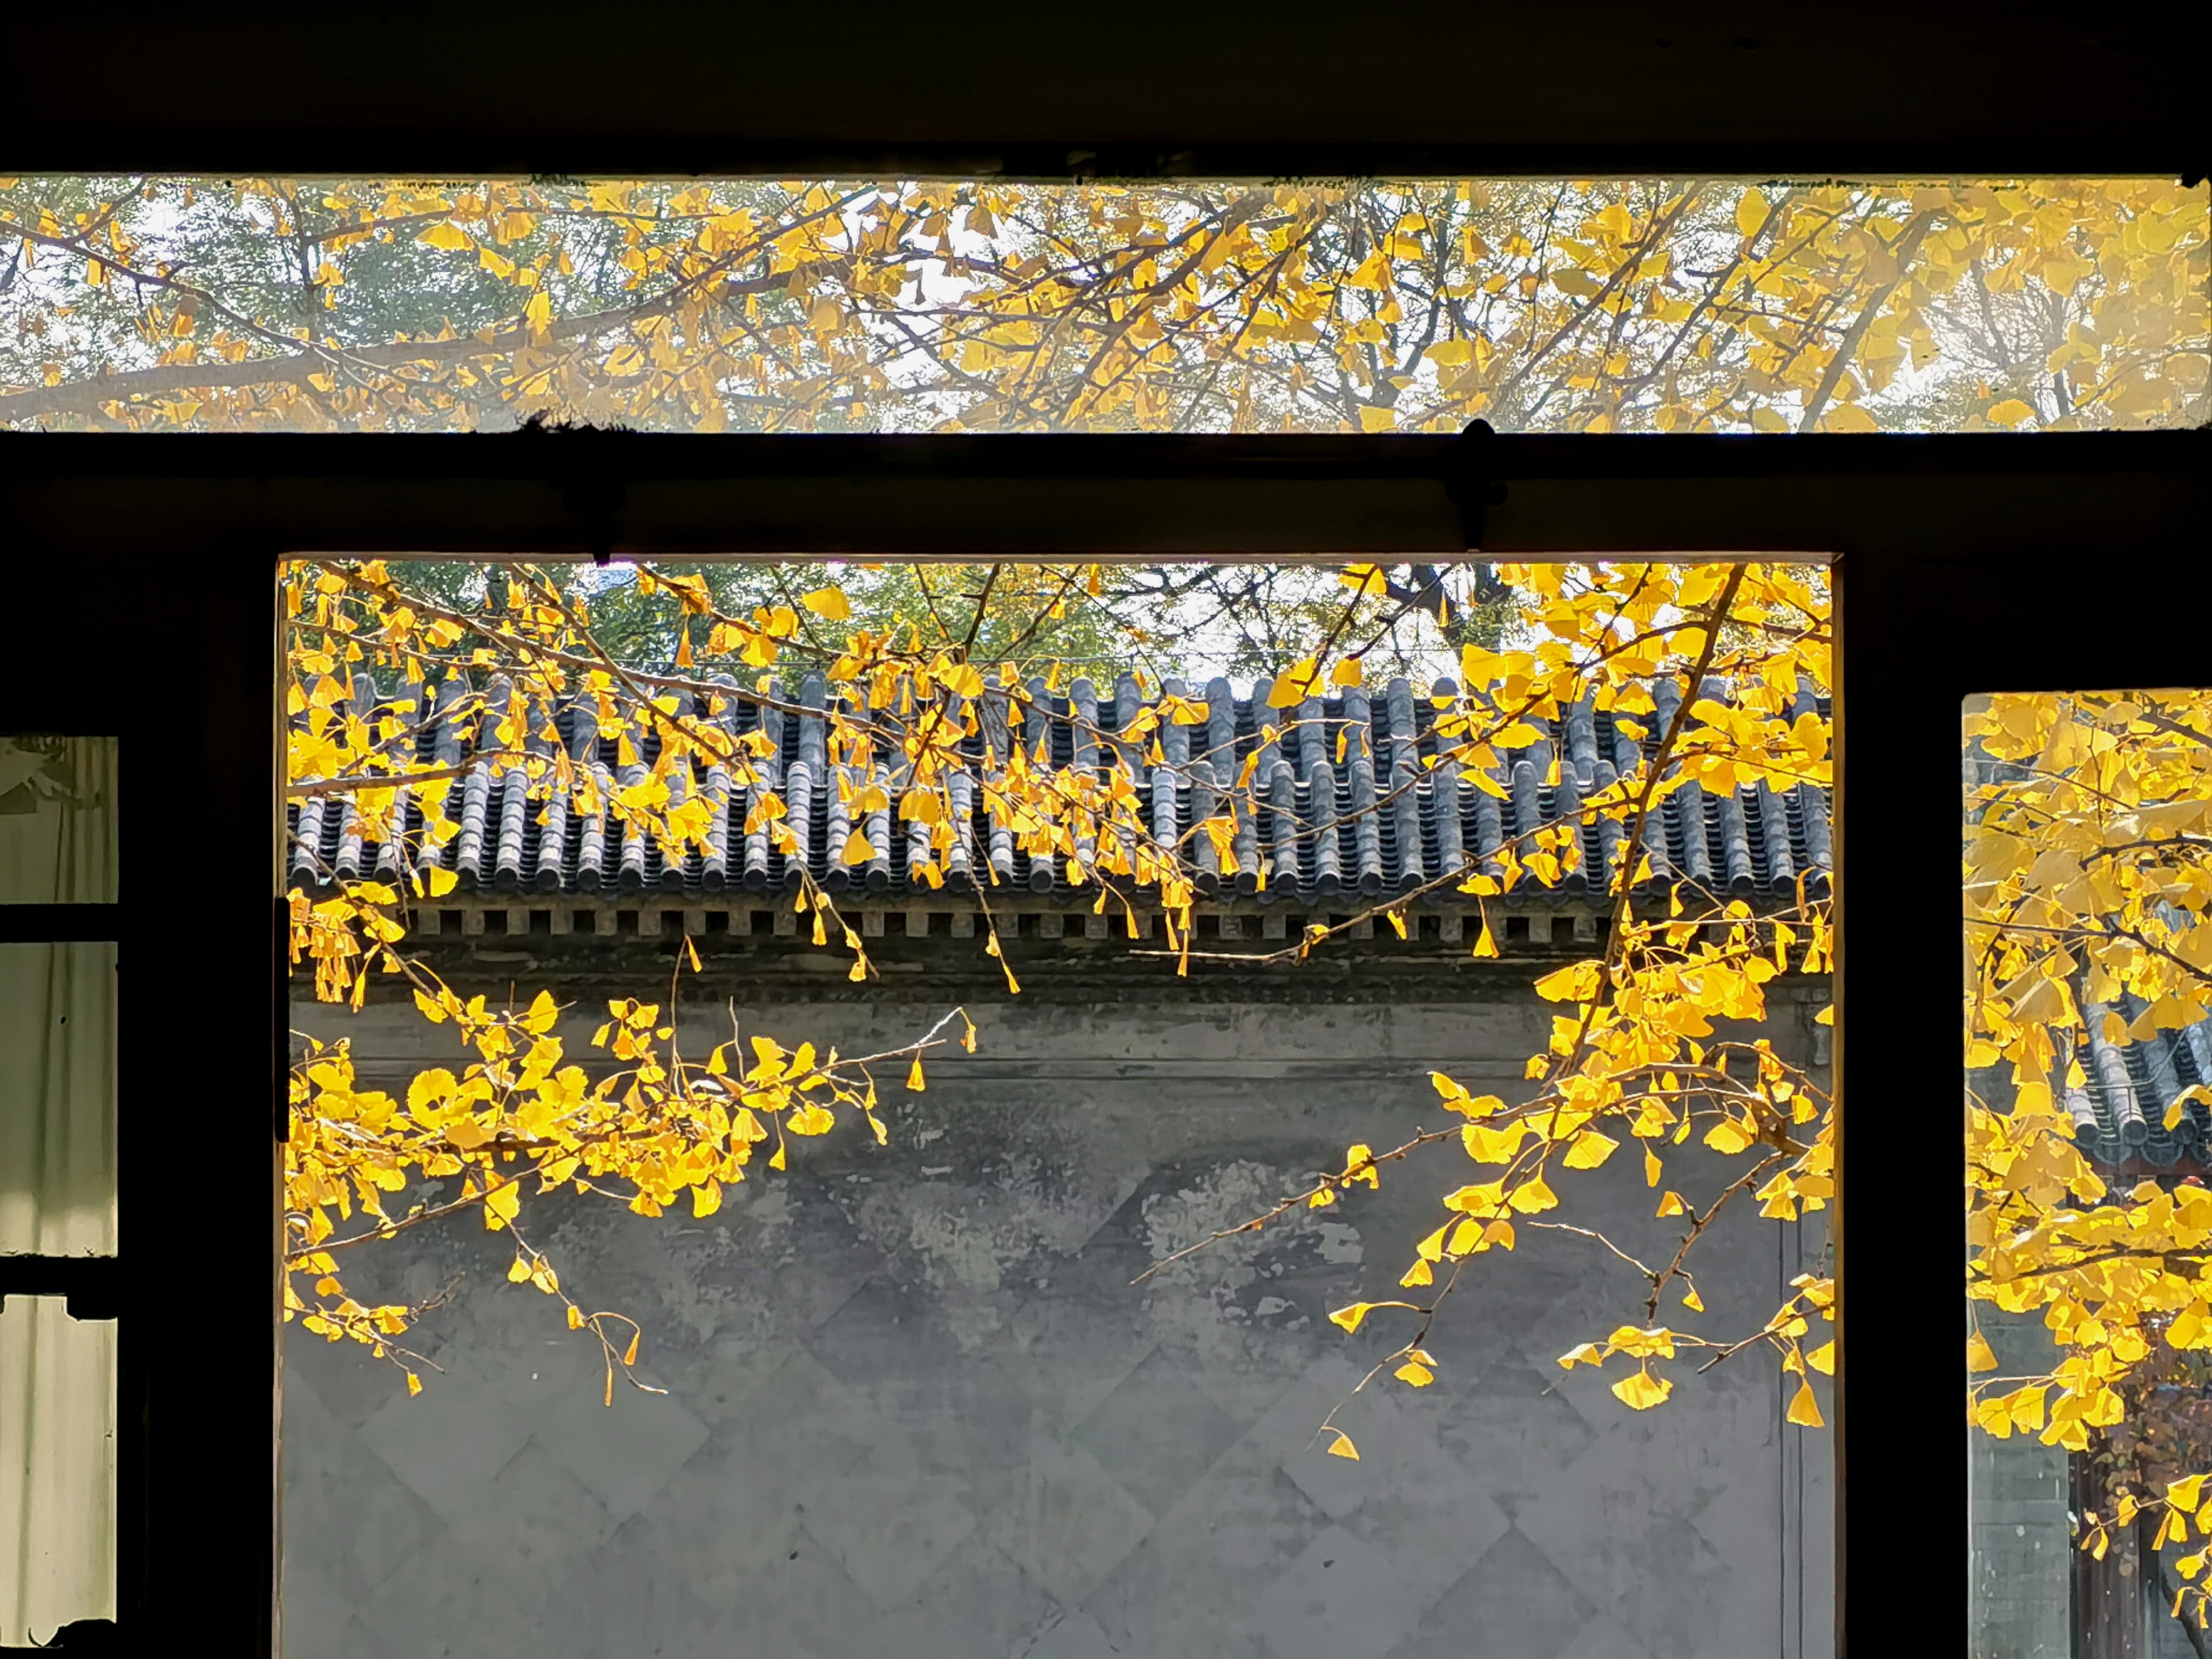 The ginkgoes in autumn